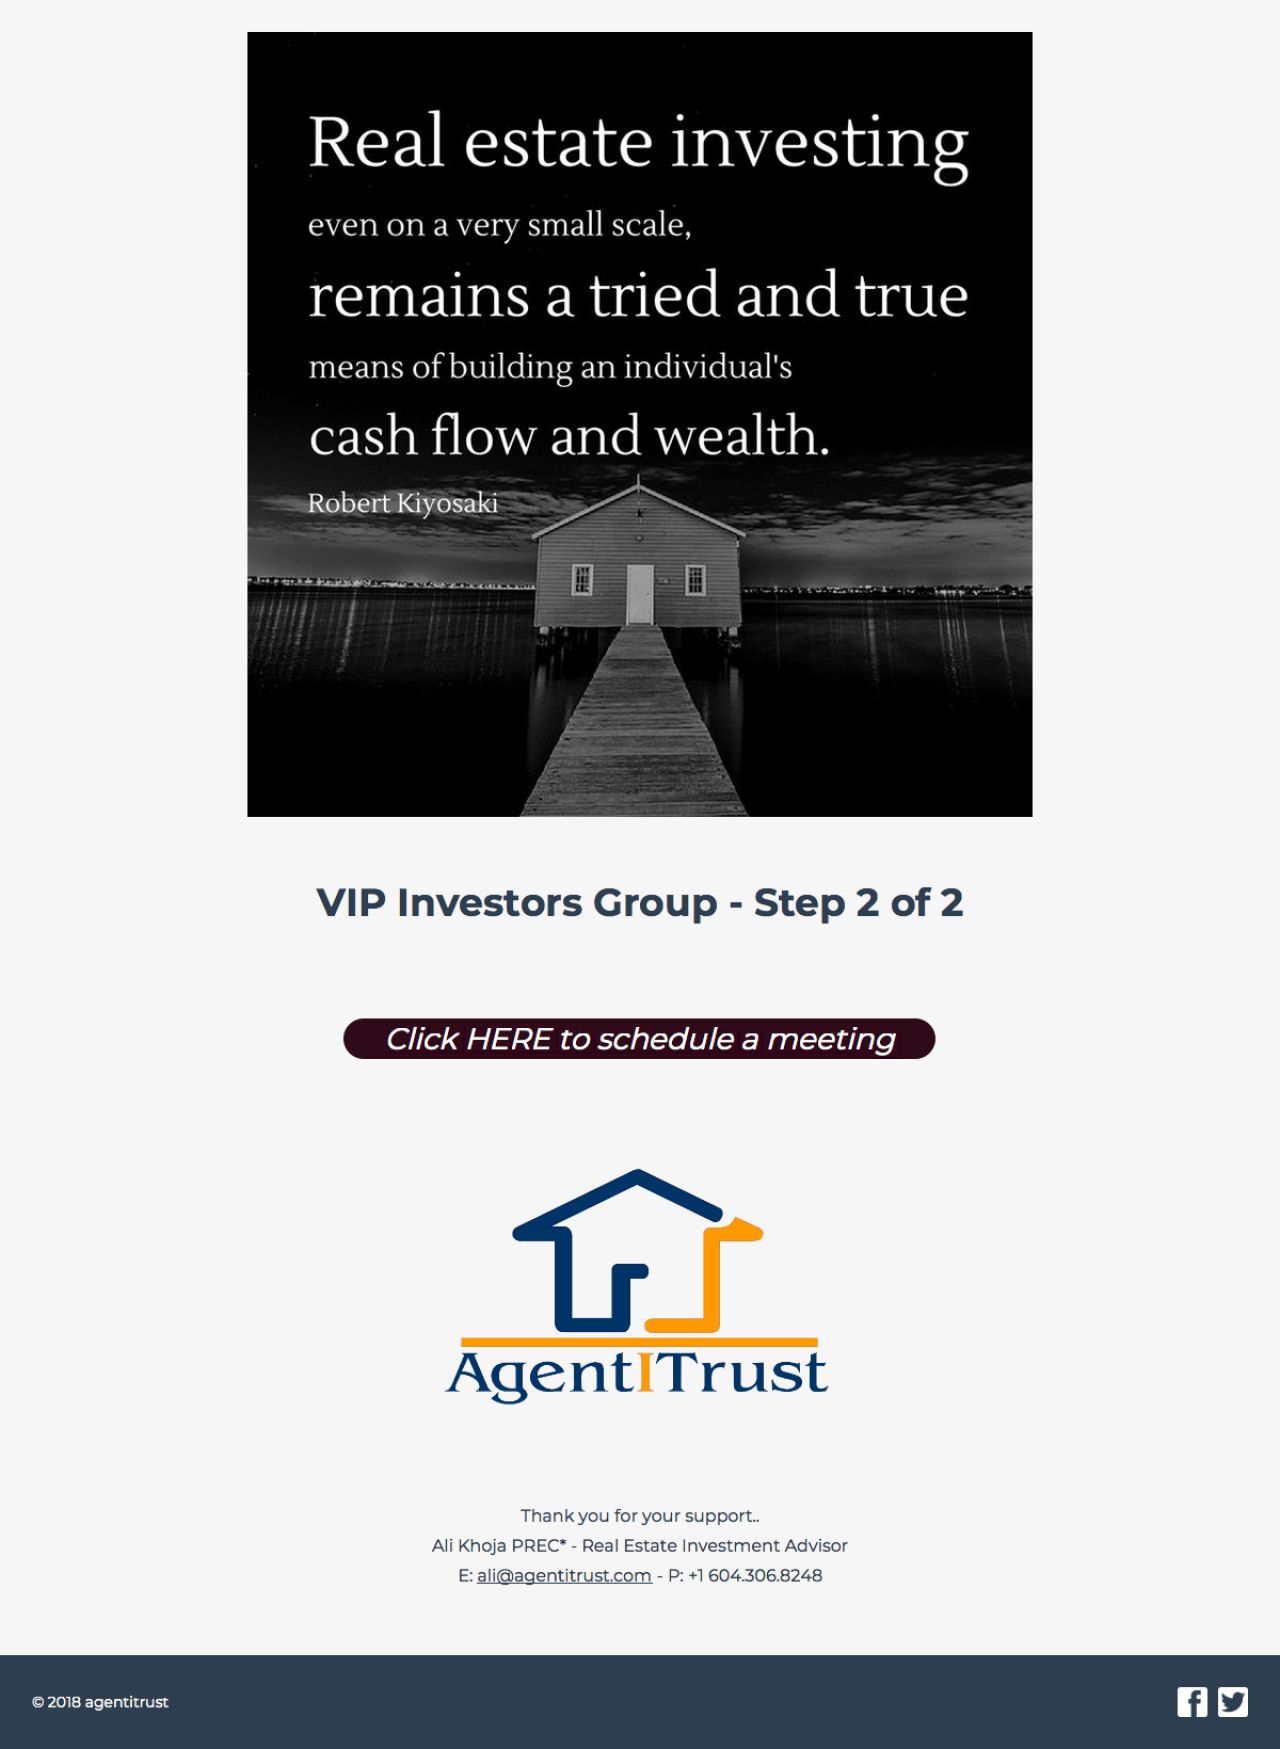 Ali Khoja PREC* - VIP Investors Group - Step 2 of 2 example - Made with MailerLite